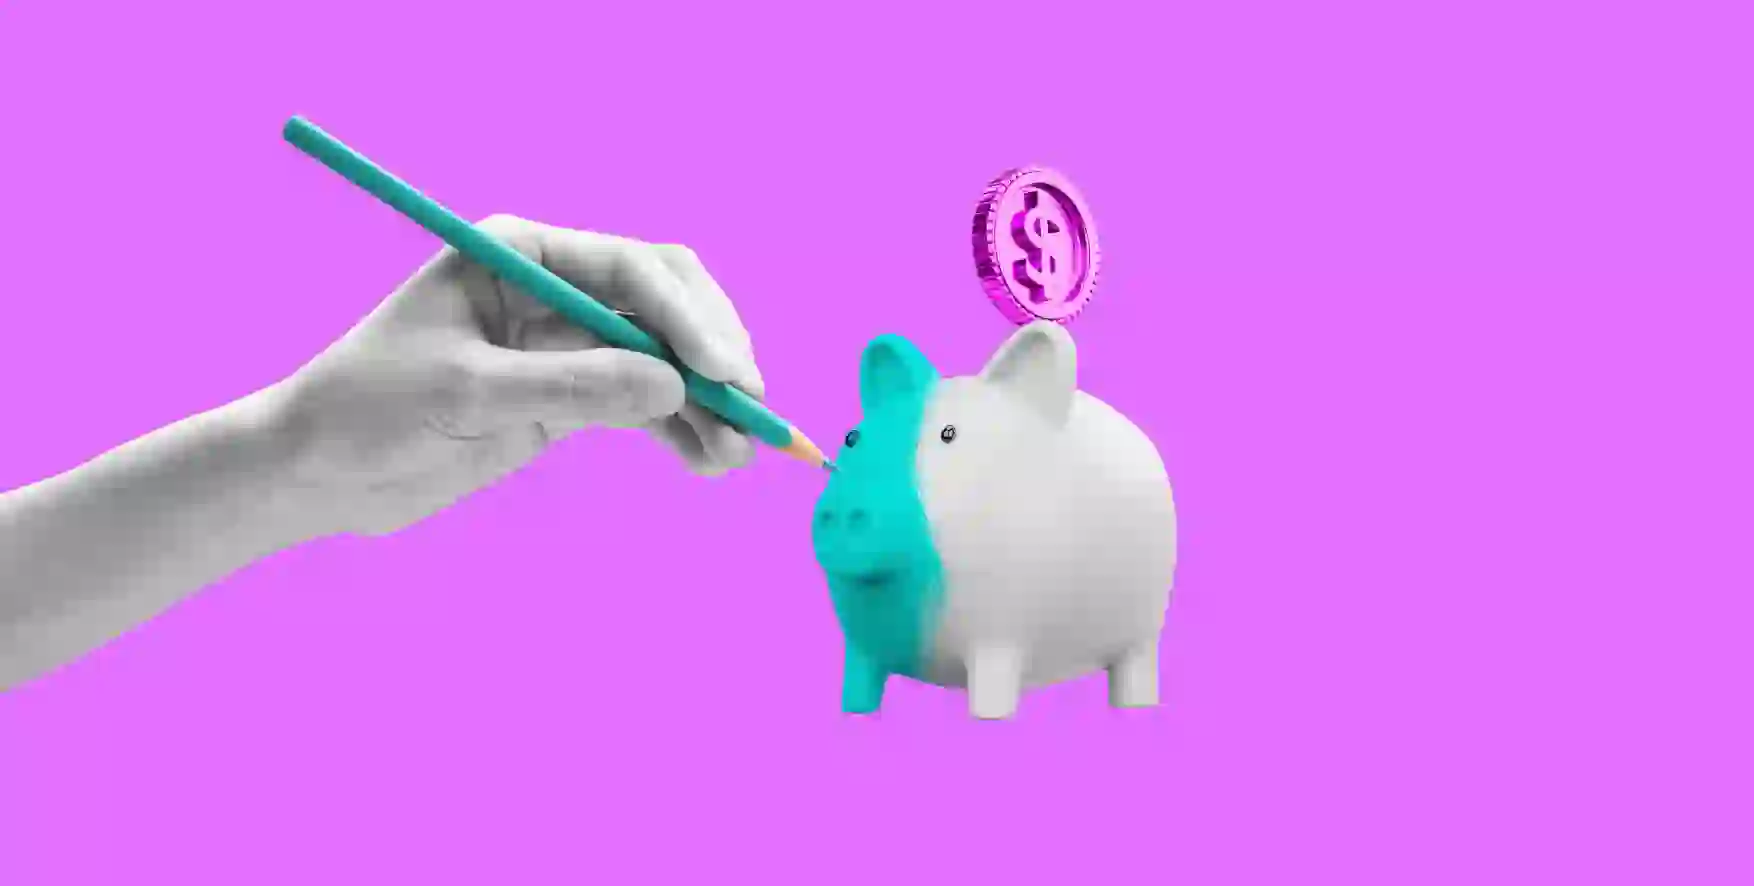 the piggy bank is painted with a pencil in a different color